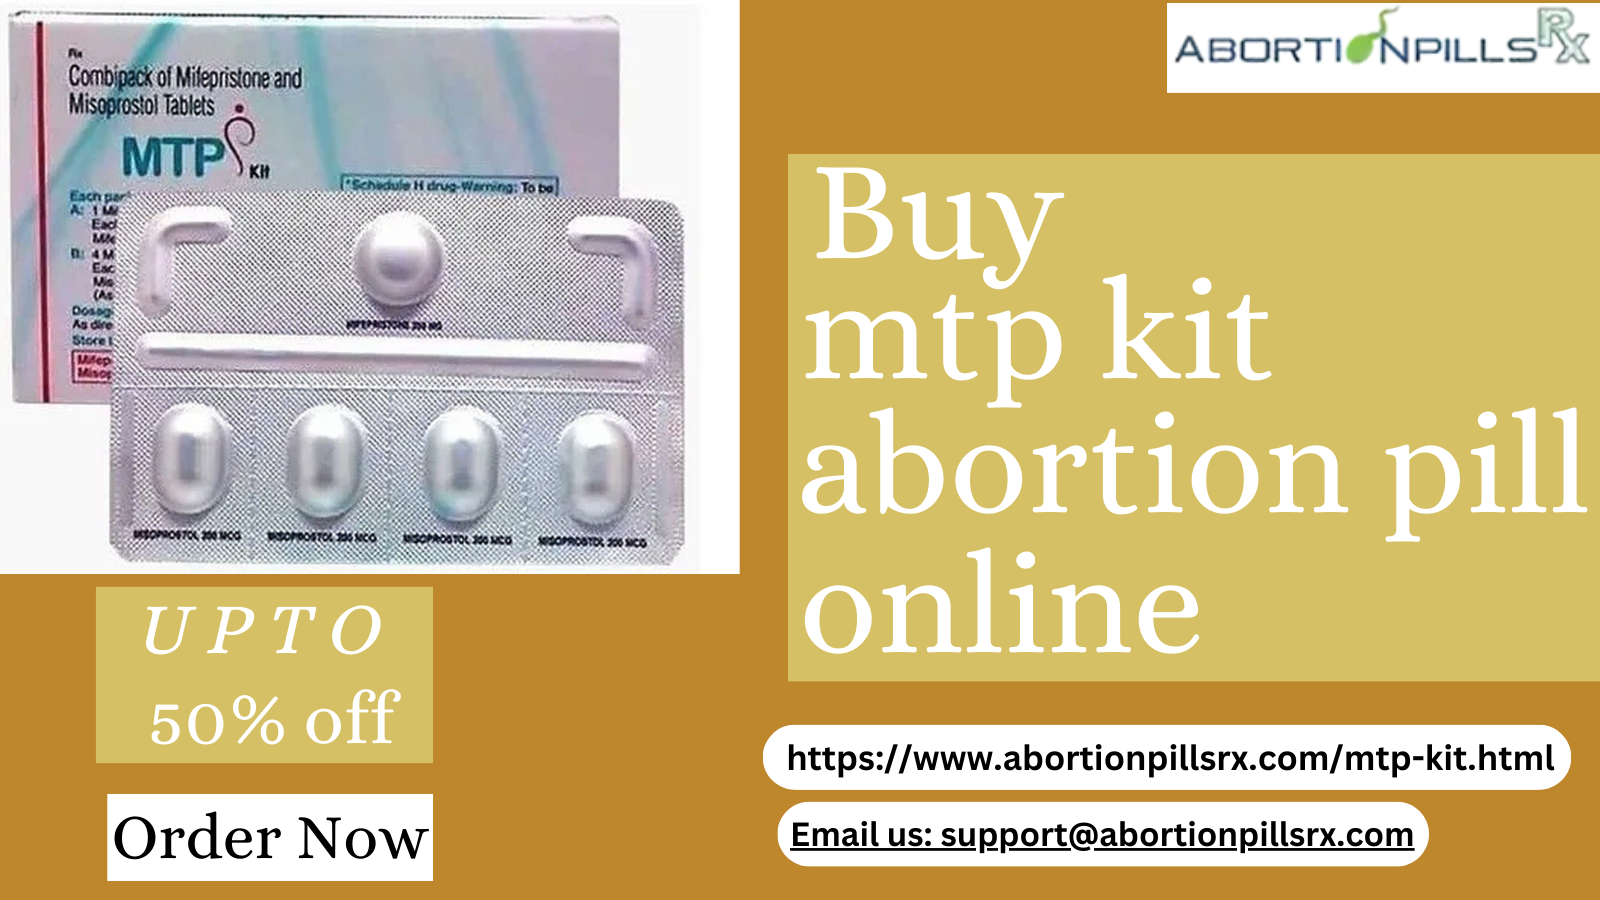 Mtp Kit  Buy mtp kit abortion pill online upto 50 off  Or - New York - New York ID1517564